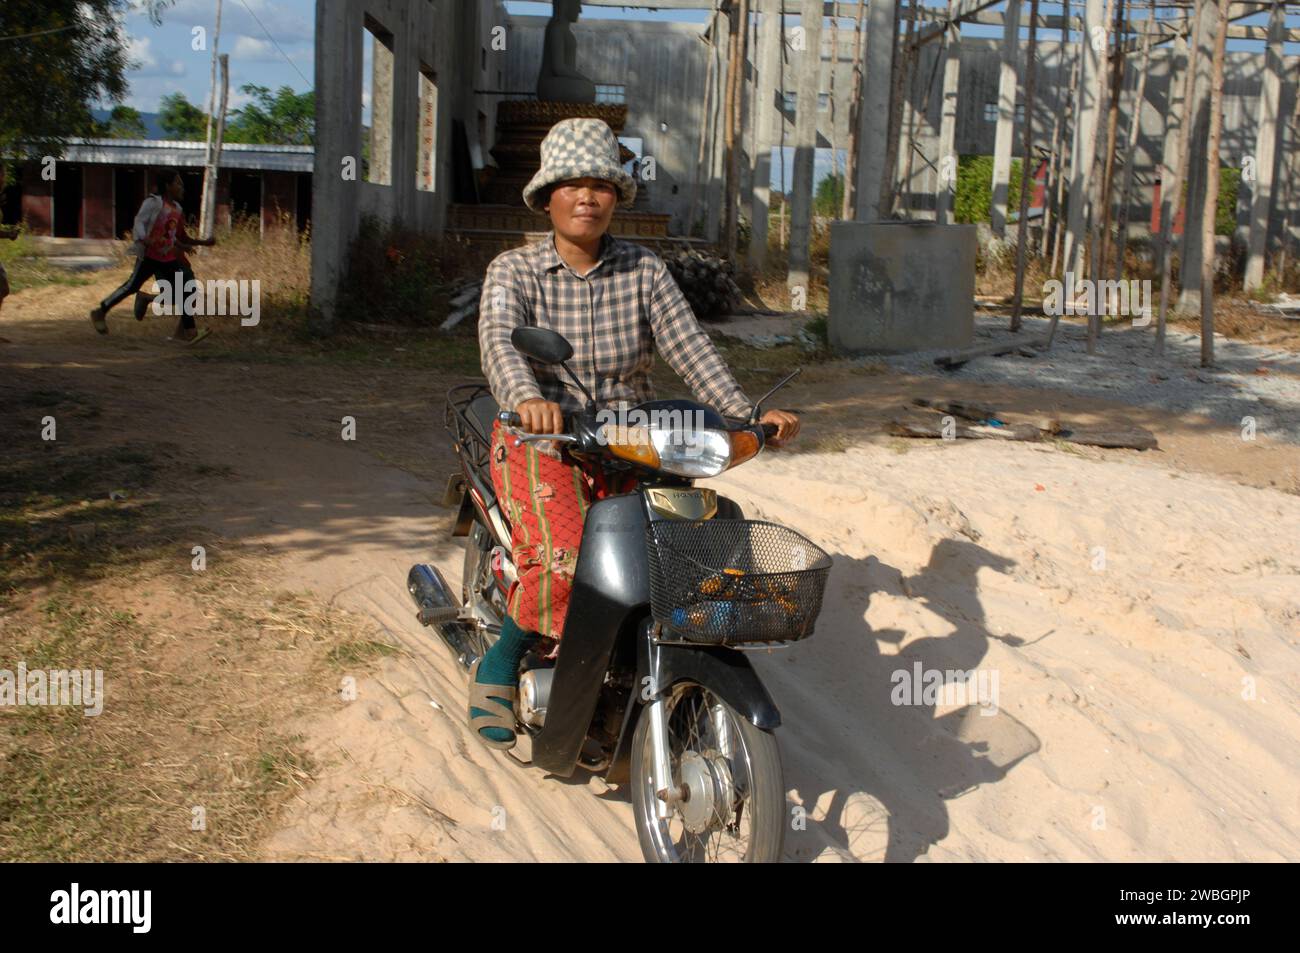 Old Lady riding a motorcycle, Beng Mealea, Cambodia. Stock Photo